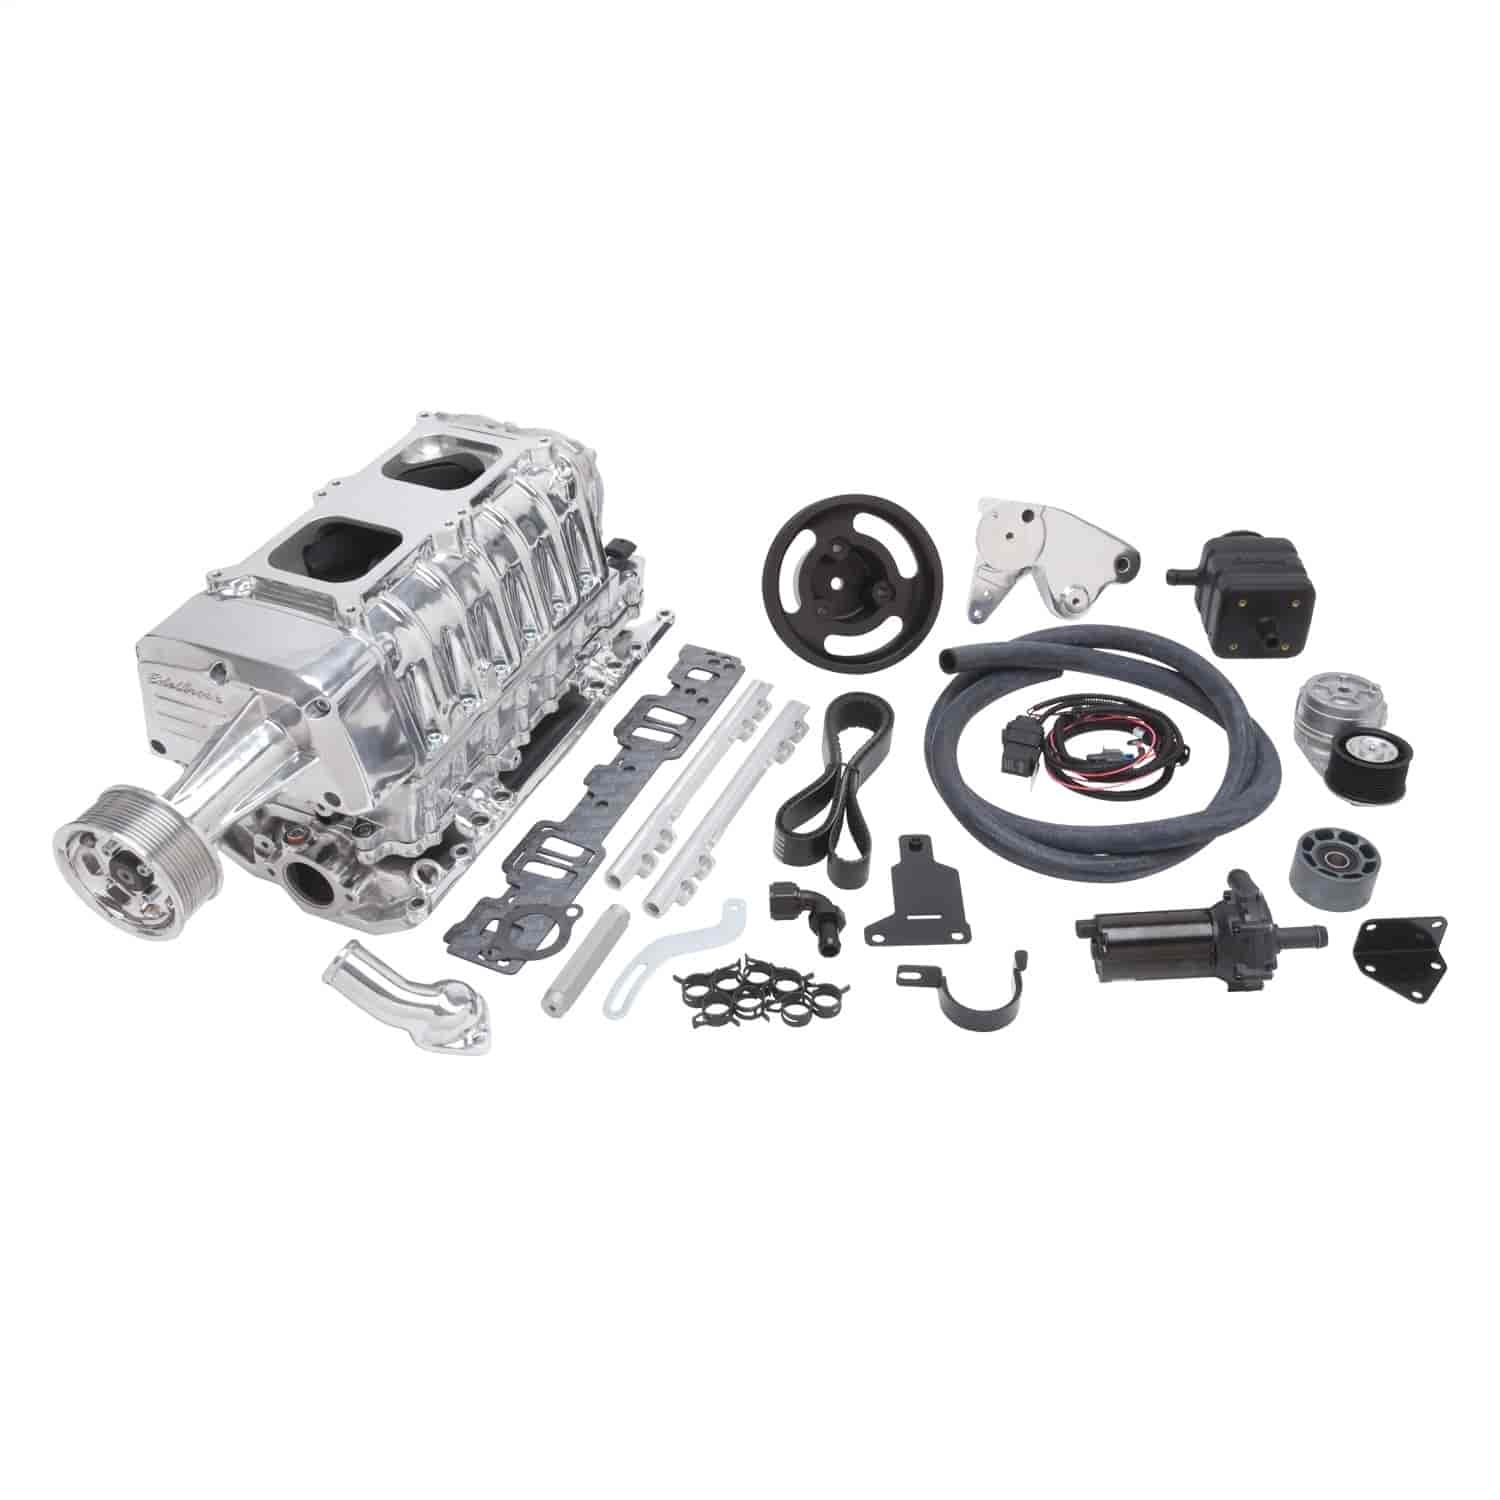 E-Force Enforcer RPM EFI Polished Supercharger Kit for 1955-1986 Small Block Chevy